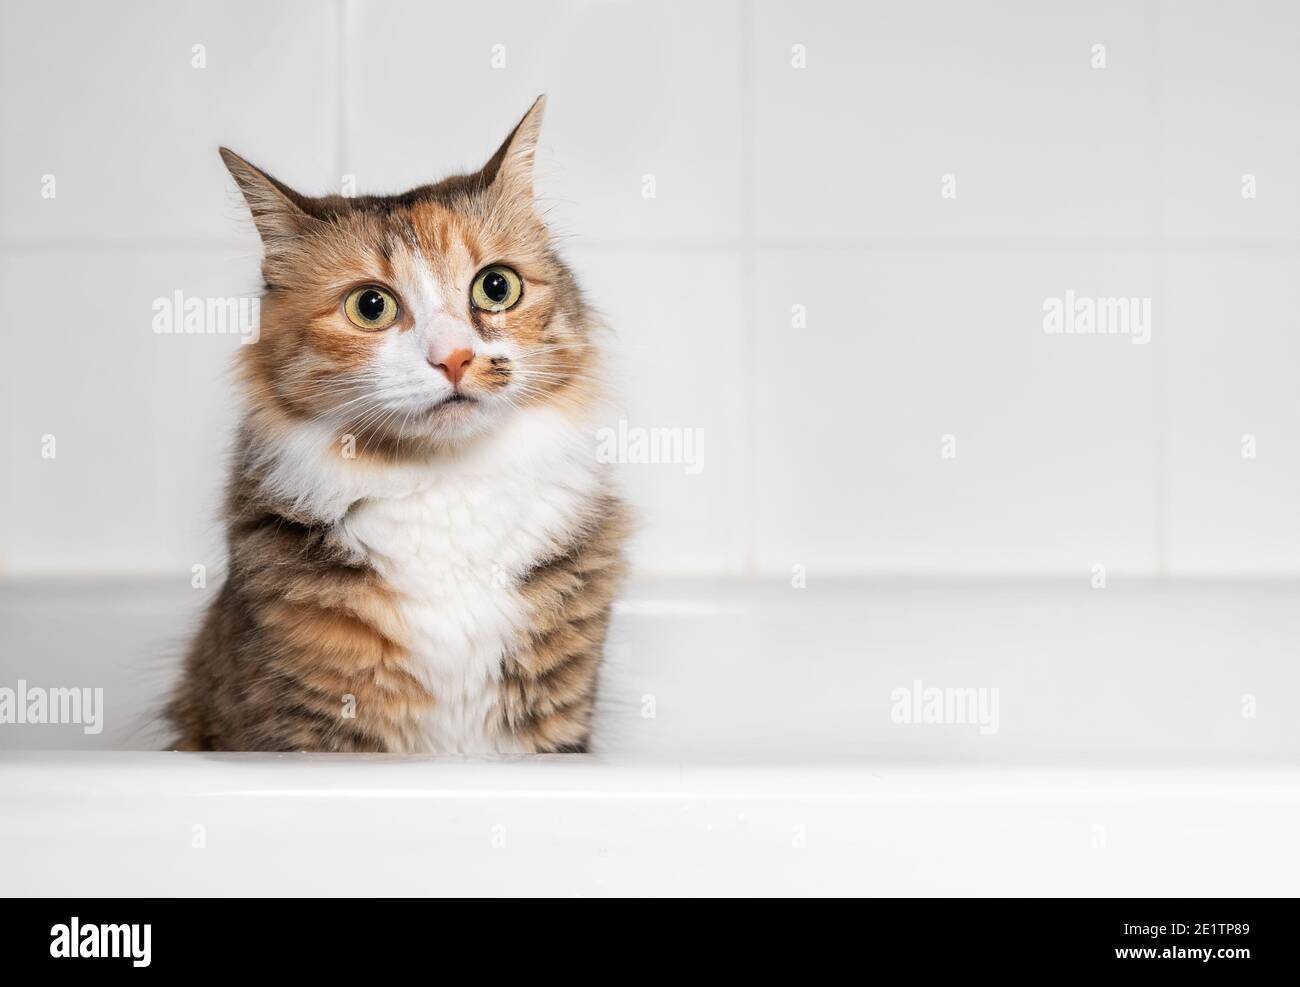 Cat sitting in bathtub after playing with water, front view. Small waterdrops on the adorable cat face with striking markings. Questioning expression Stock Photo